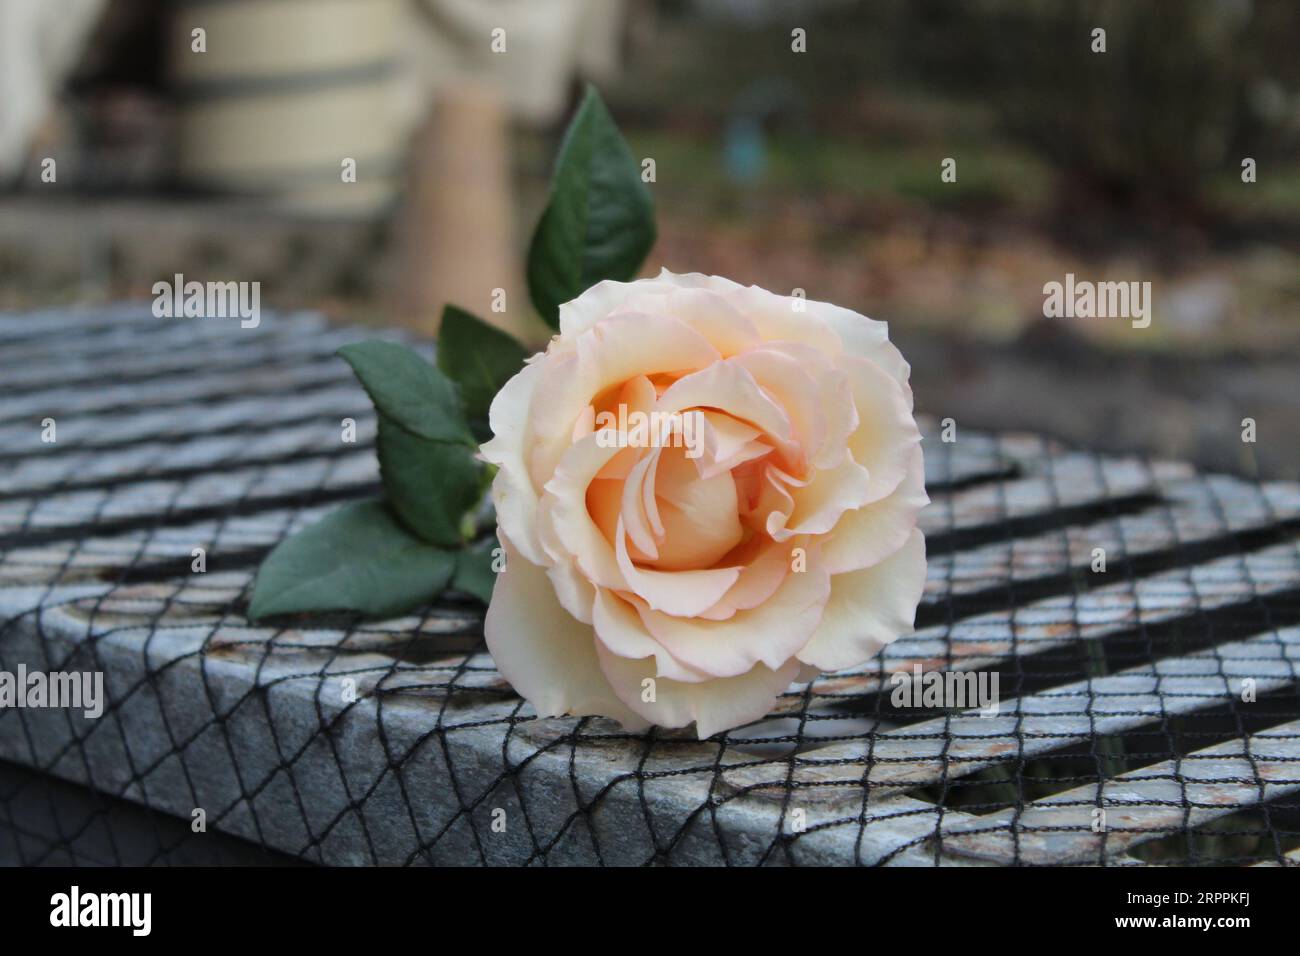 Pink Garden Rose on Outside Bench covered in Netting. Stock Photo